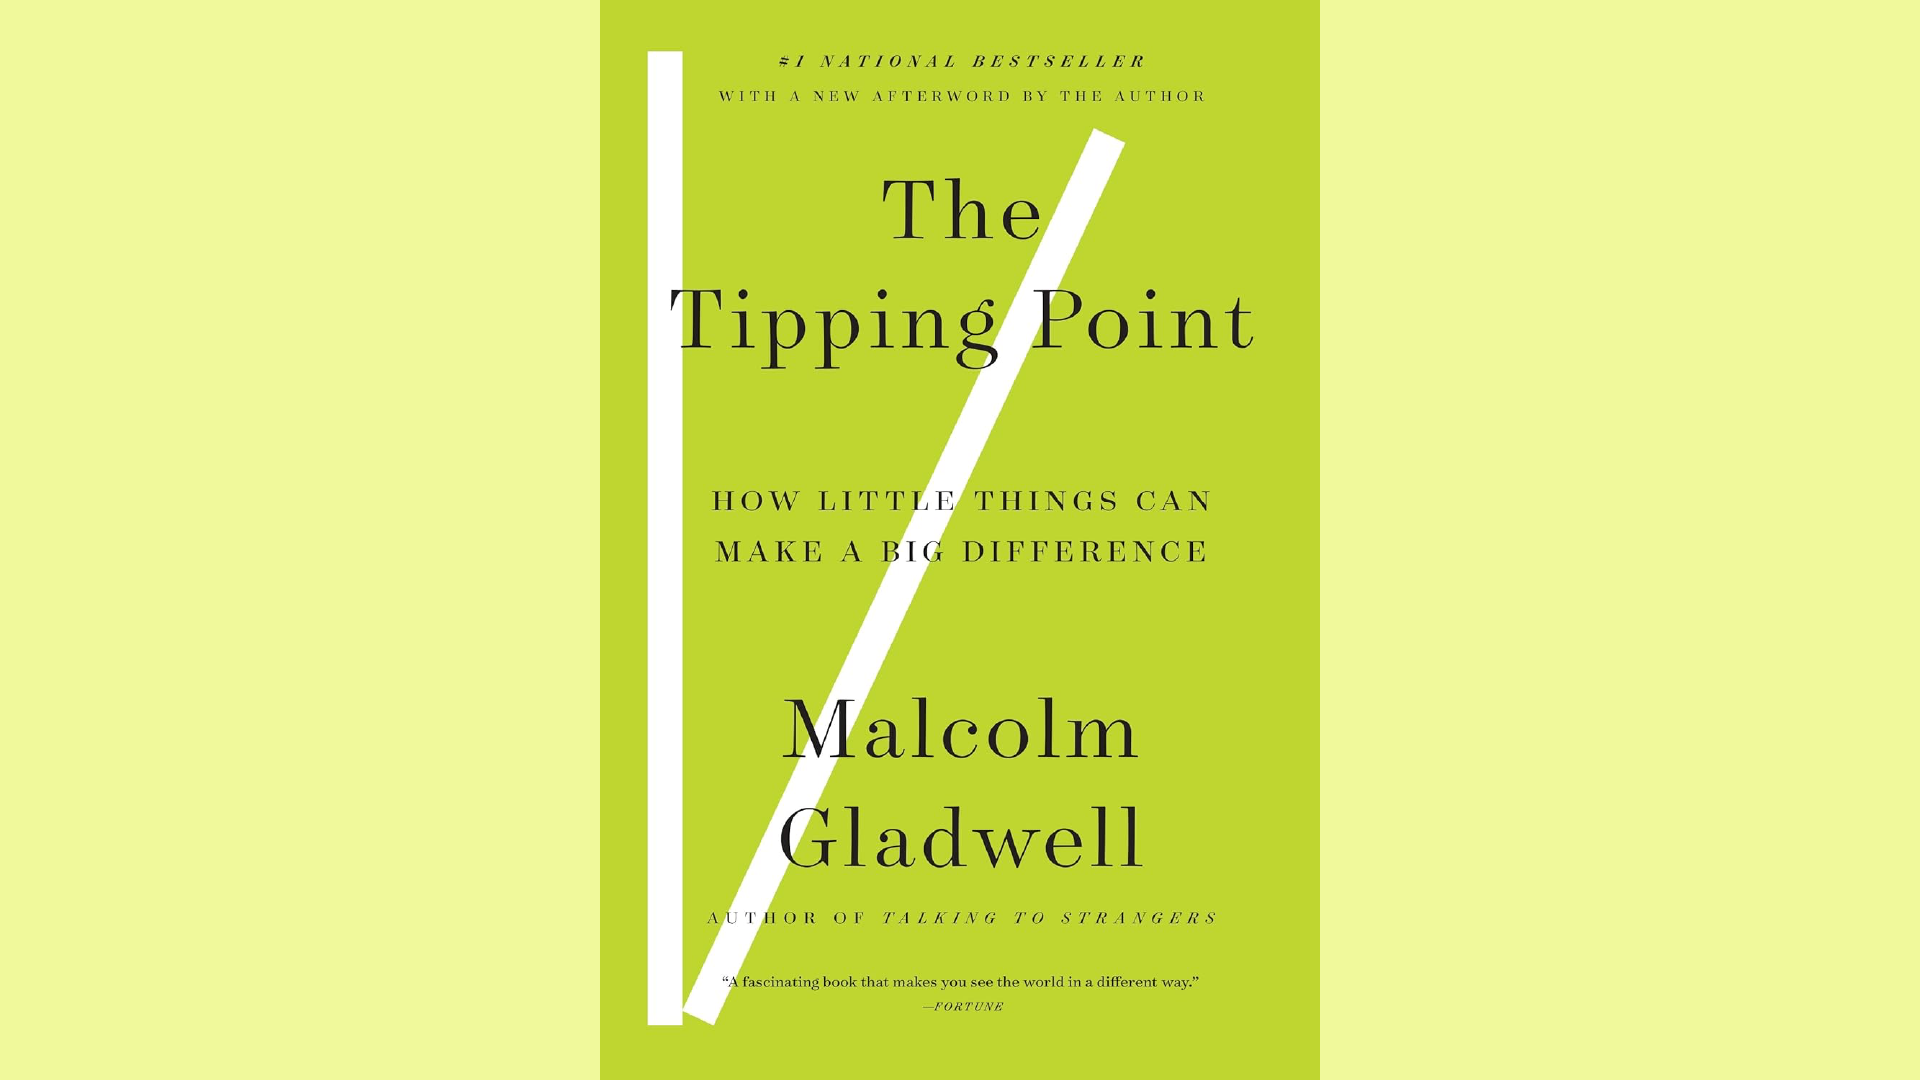 Summary: The Tipping Point by Malcolm Gladwell